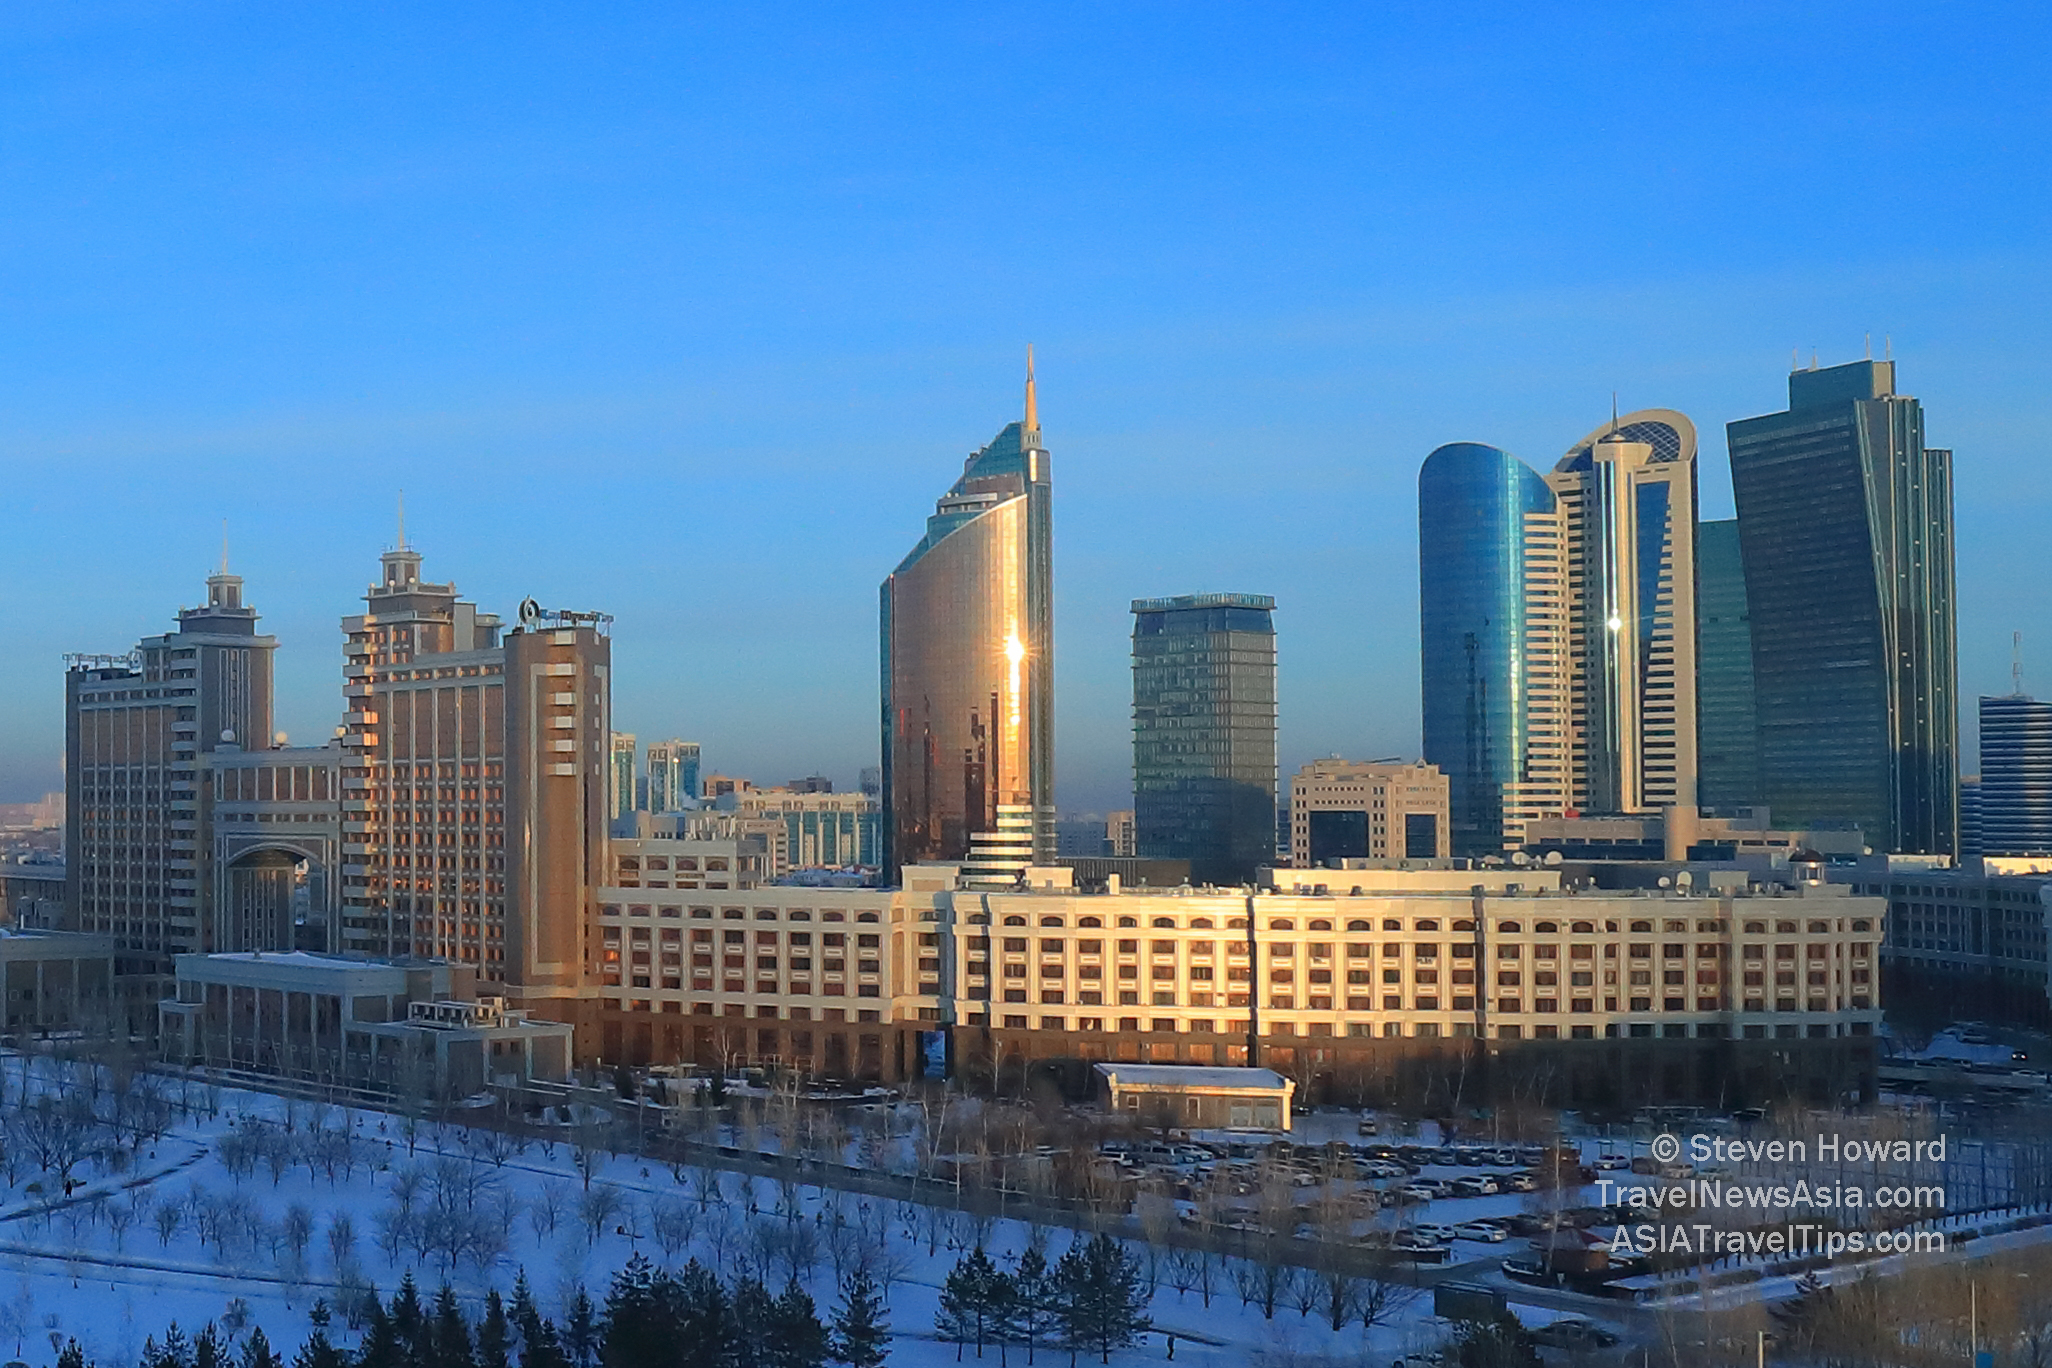 Nur-Sultan, the capital city of Kazakhstan formerly known as Astana. Picture by Steven Howard of TravelNewsAsia.com Click to enlarge.